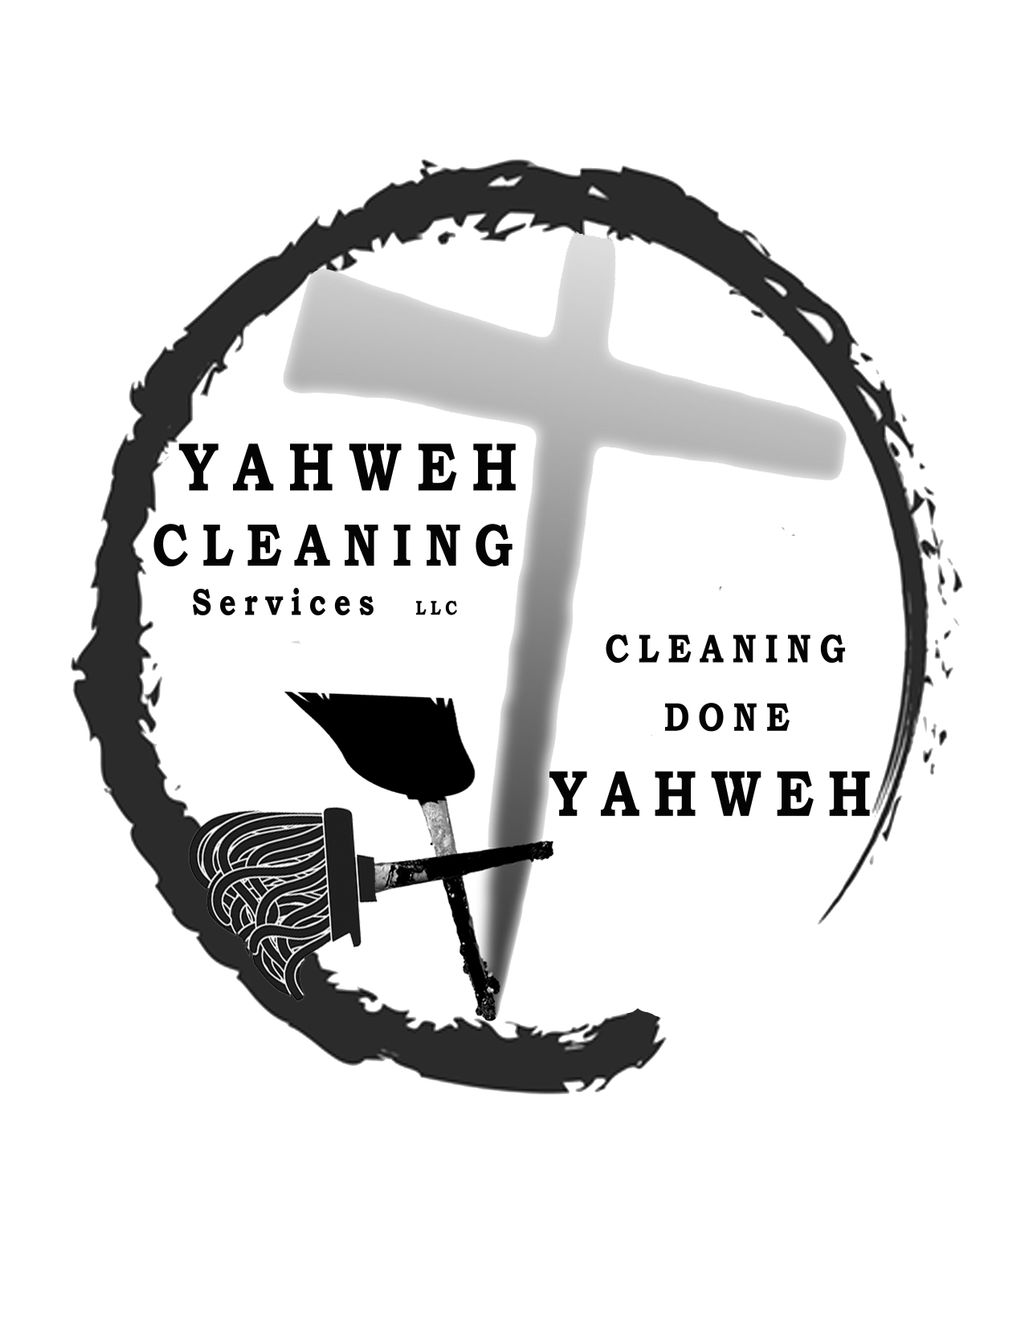 Yahweh Cleaning Services